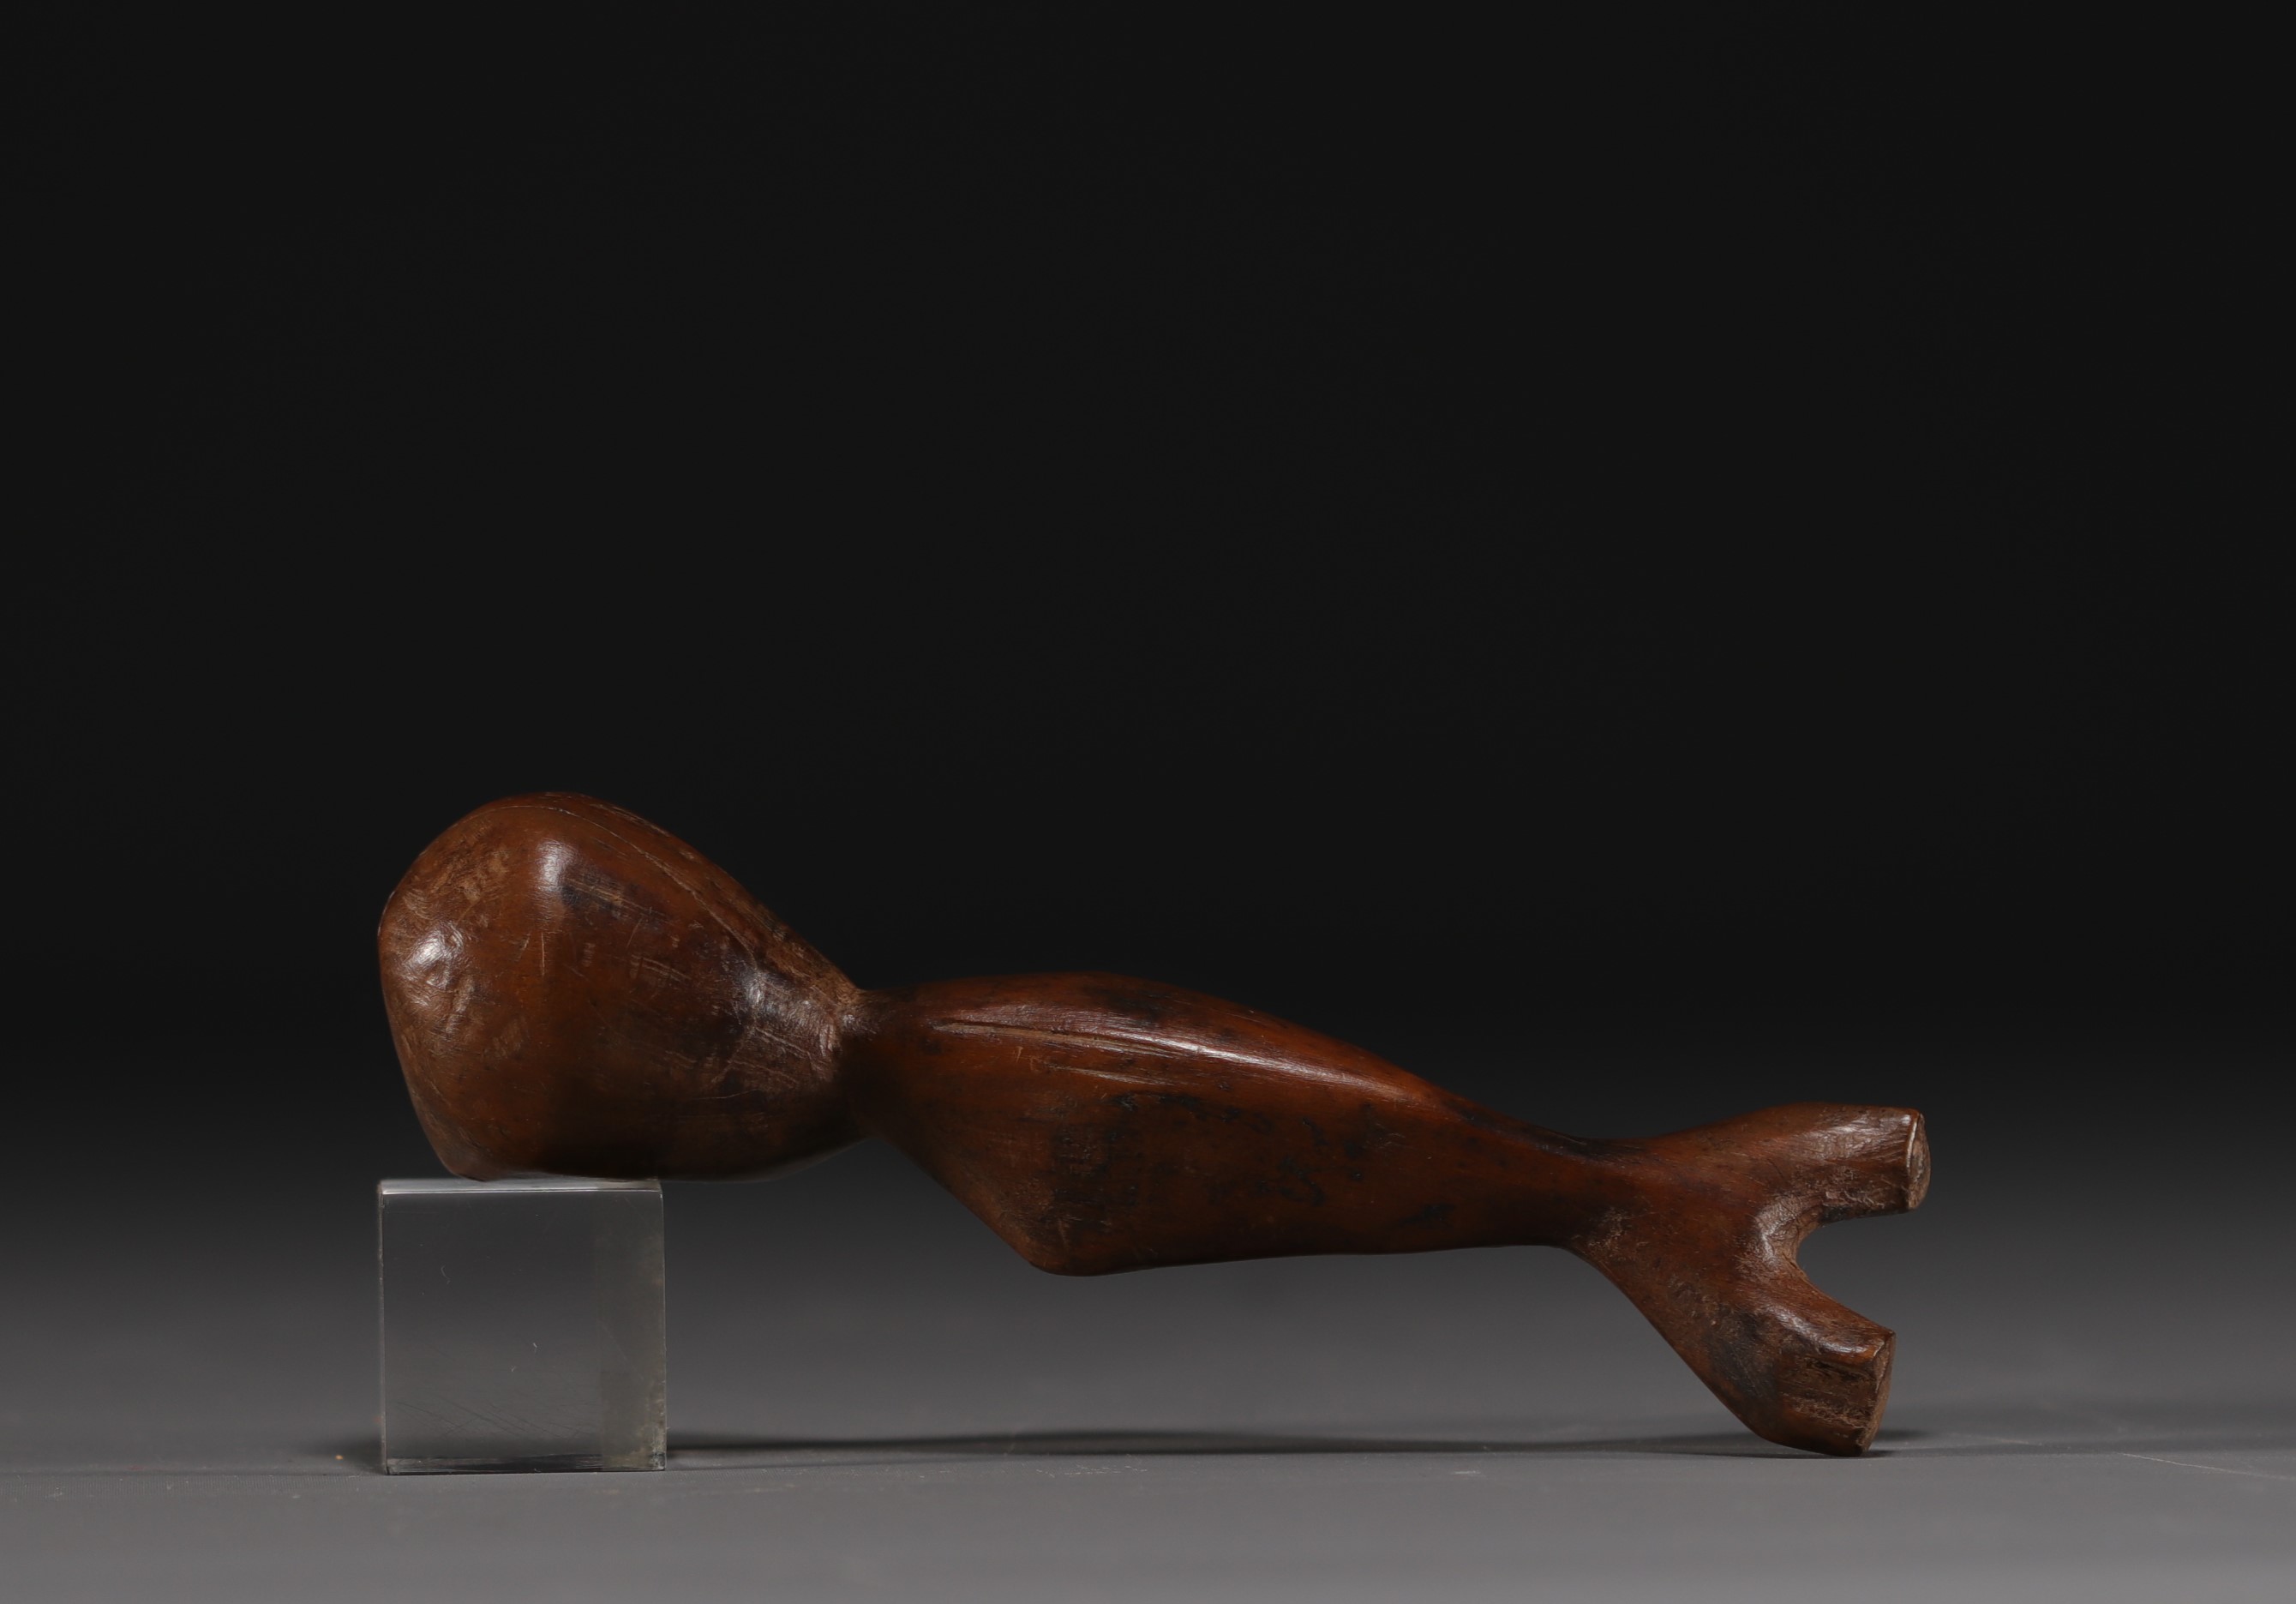 DRC - Lega statuette in carved wood. - Image 2 of 4